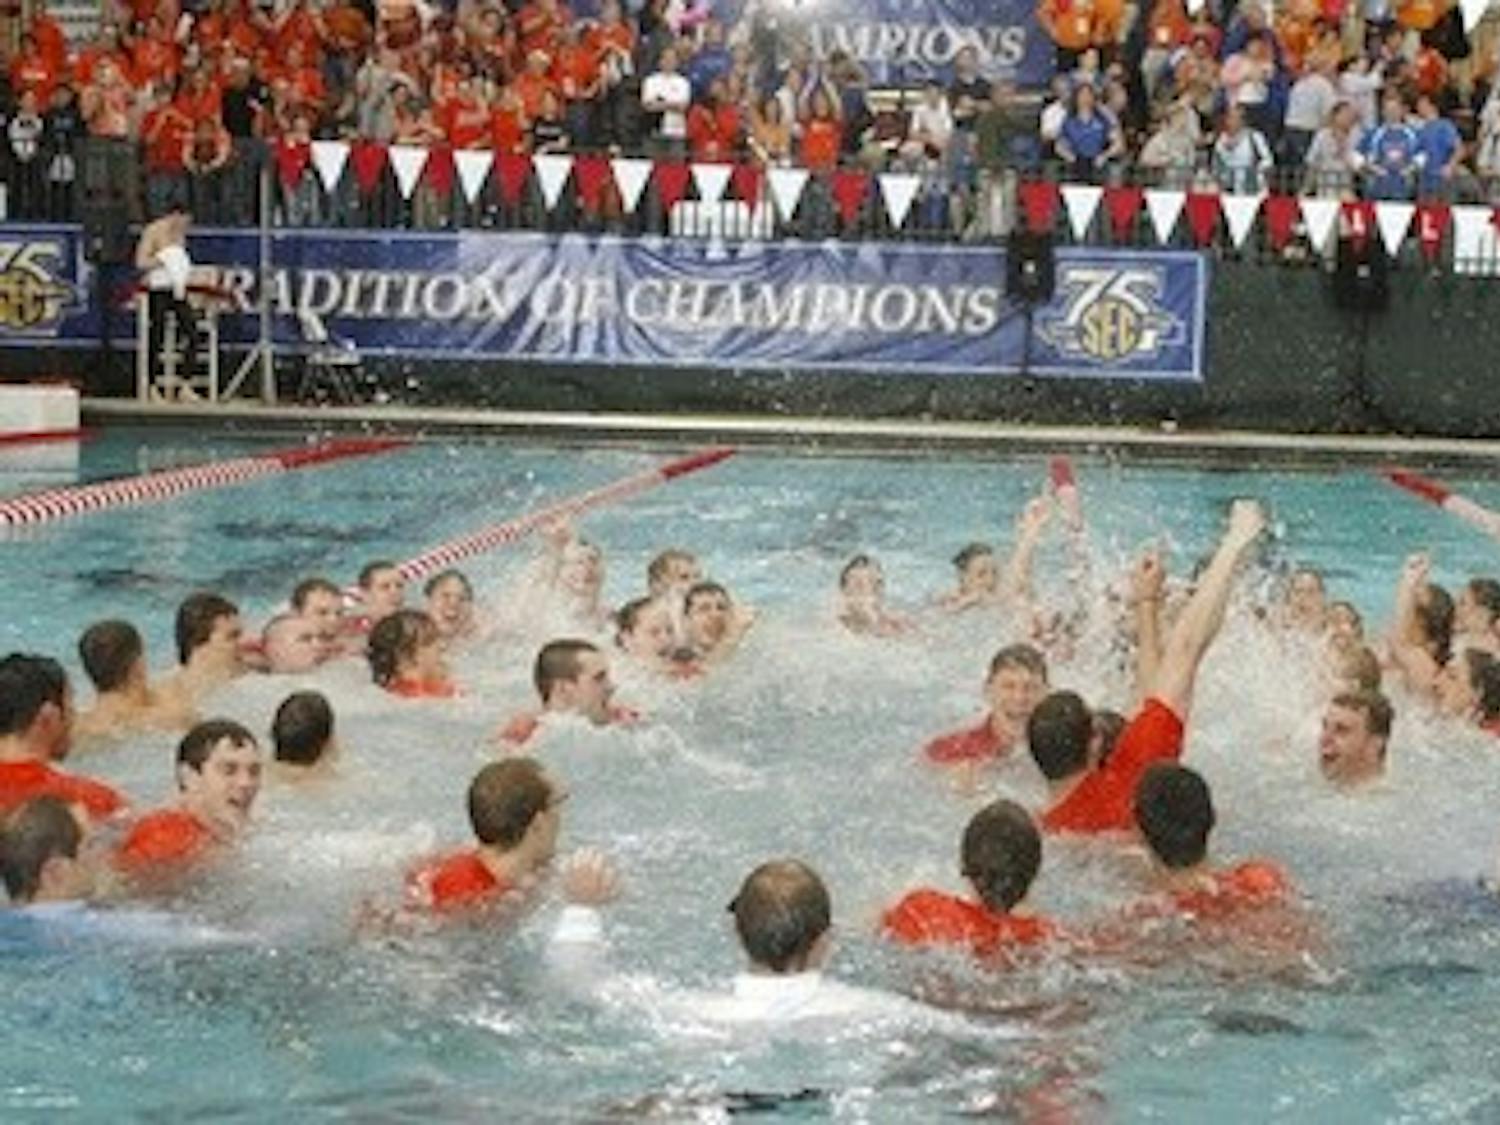 The Auburn mens and womens swimming and diving teams celebrate winning the SEC Swimming and Diving Championships. Auburn coach Richard Quick is center.
Auburn SEC Swimming Finals on Saturday, Feb. 25, 2008 in Tuscaloosa, Ala.. 
Todd Van Emst